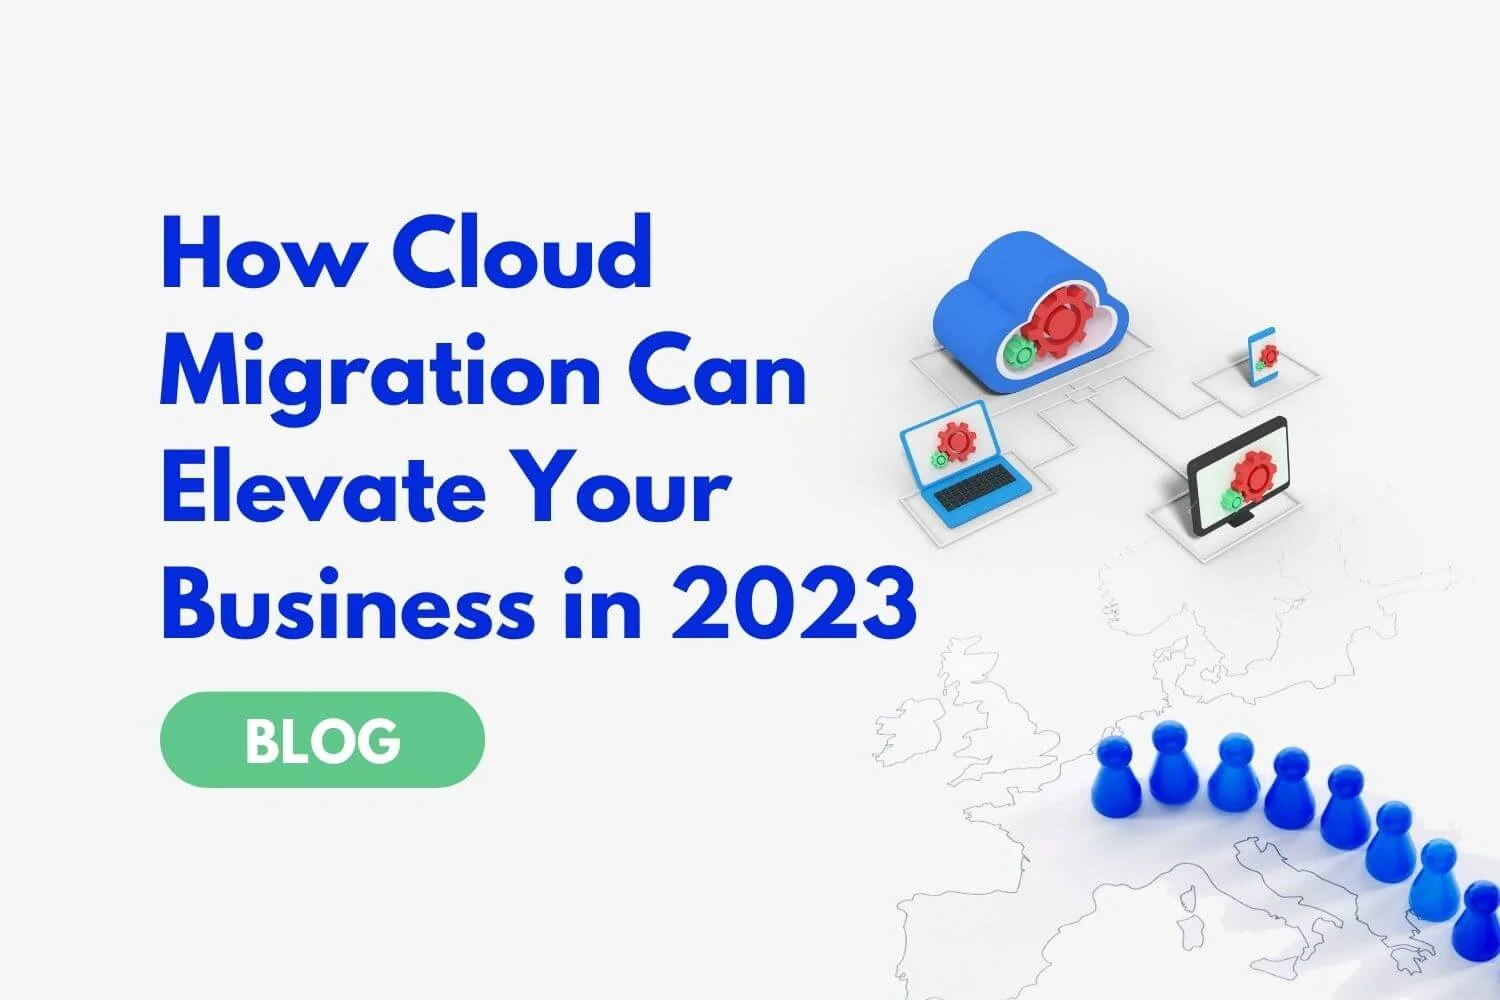 How Cloud Migration Can Elevate Your Business in 2023